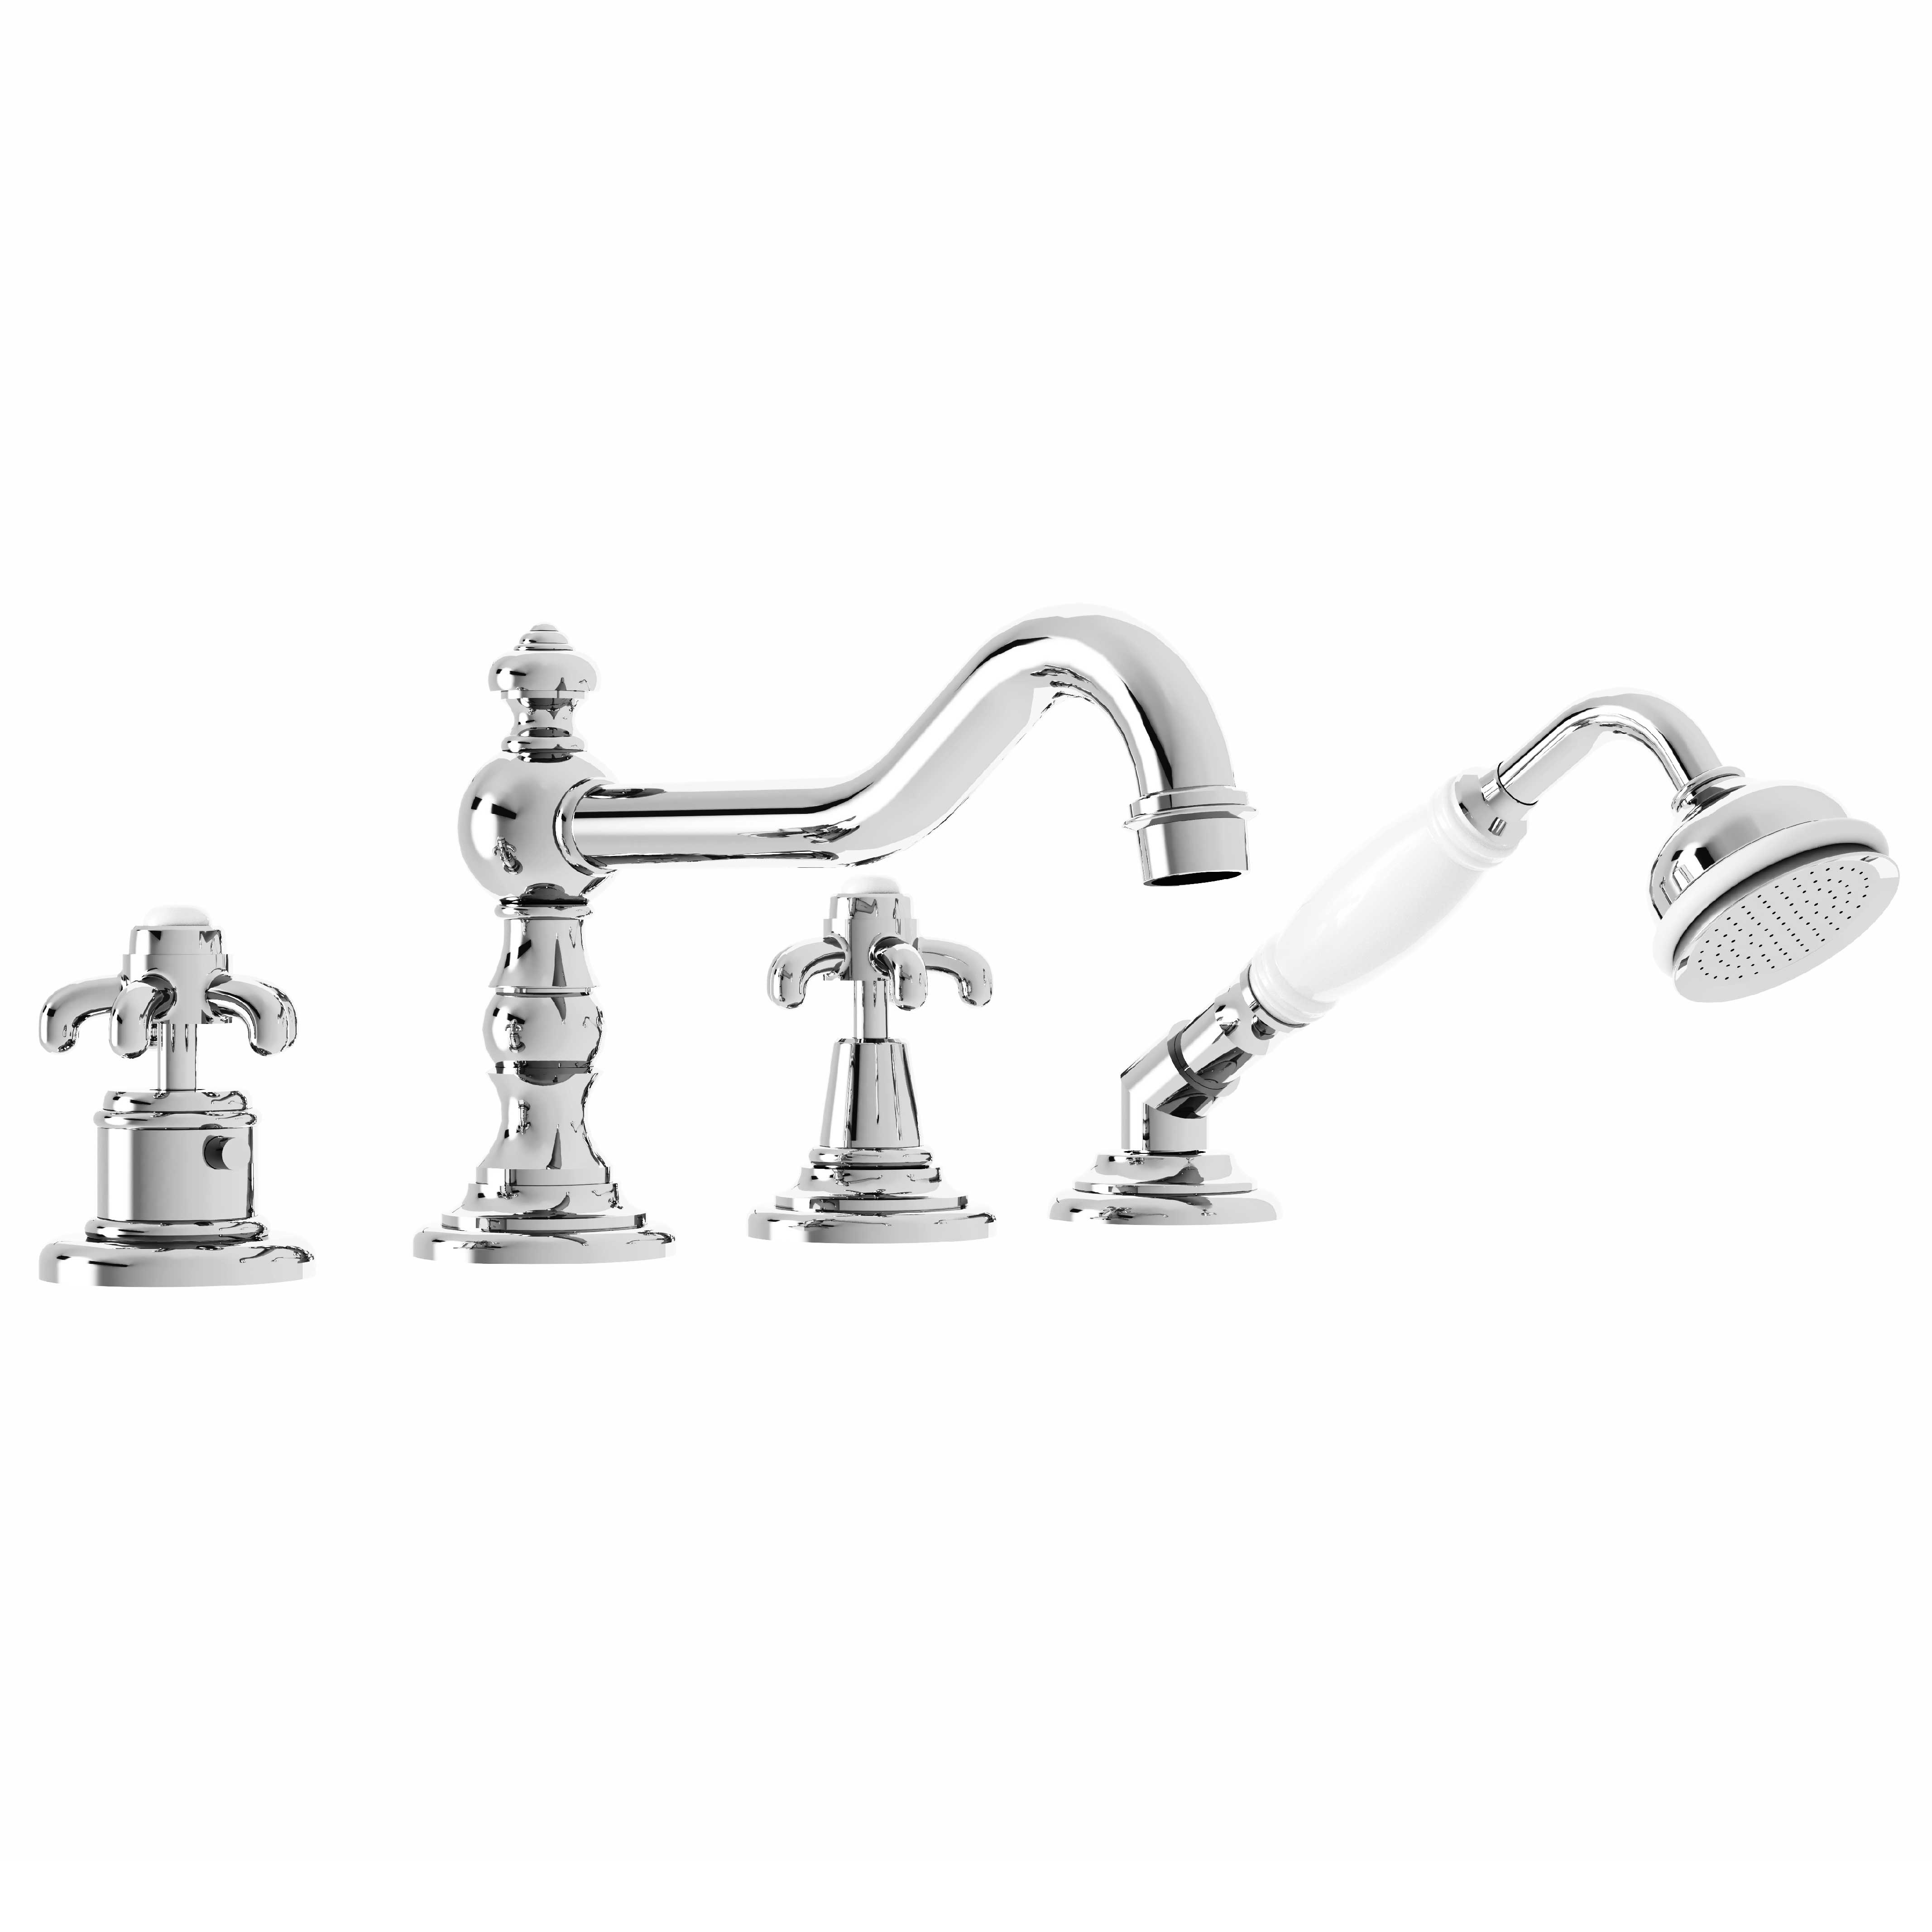 M01-3304TXL XL 4-hole bath and shower thermo. mixer